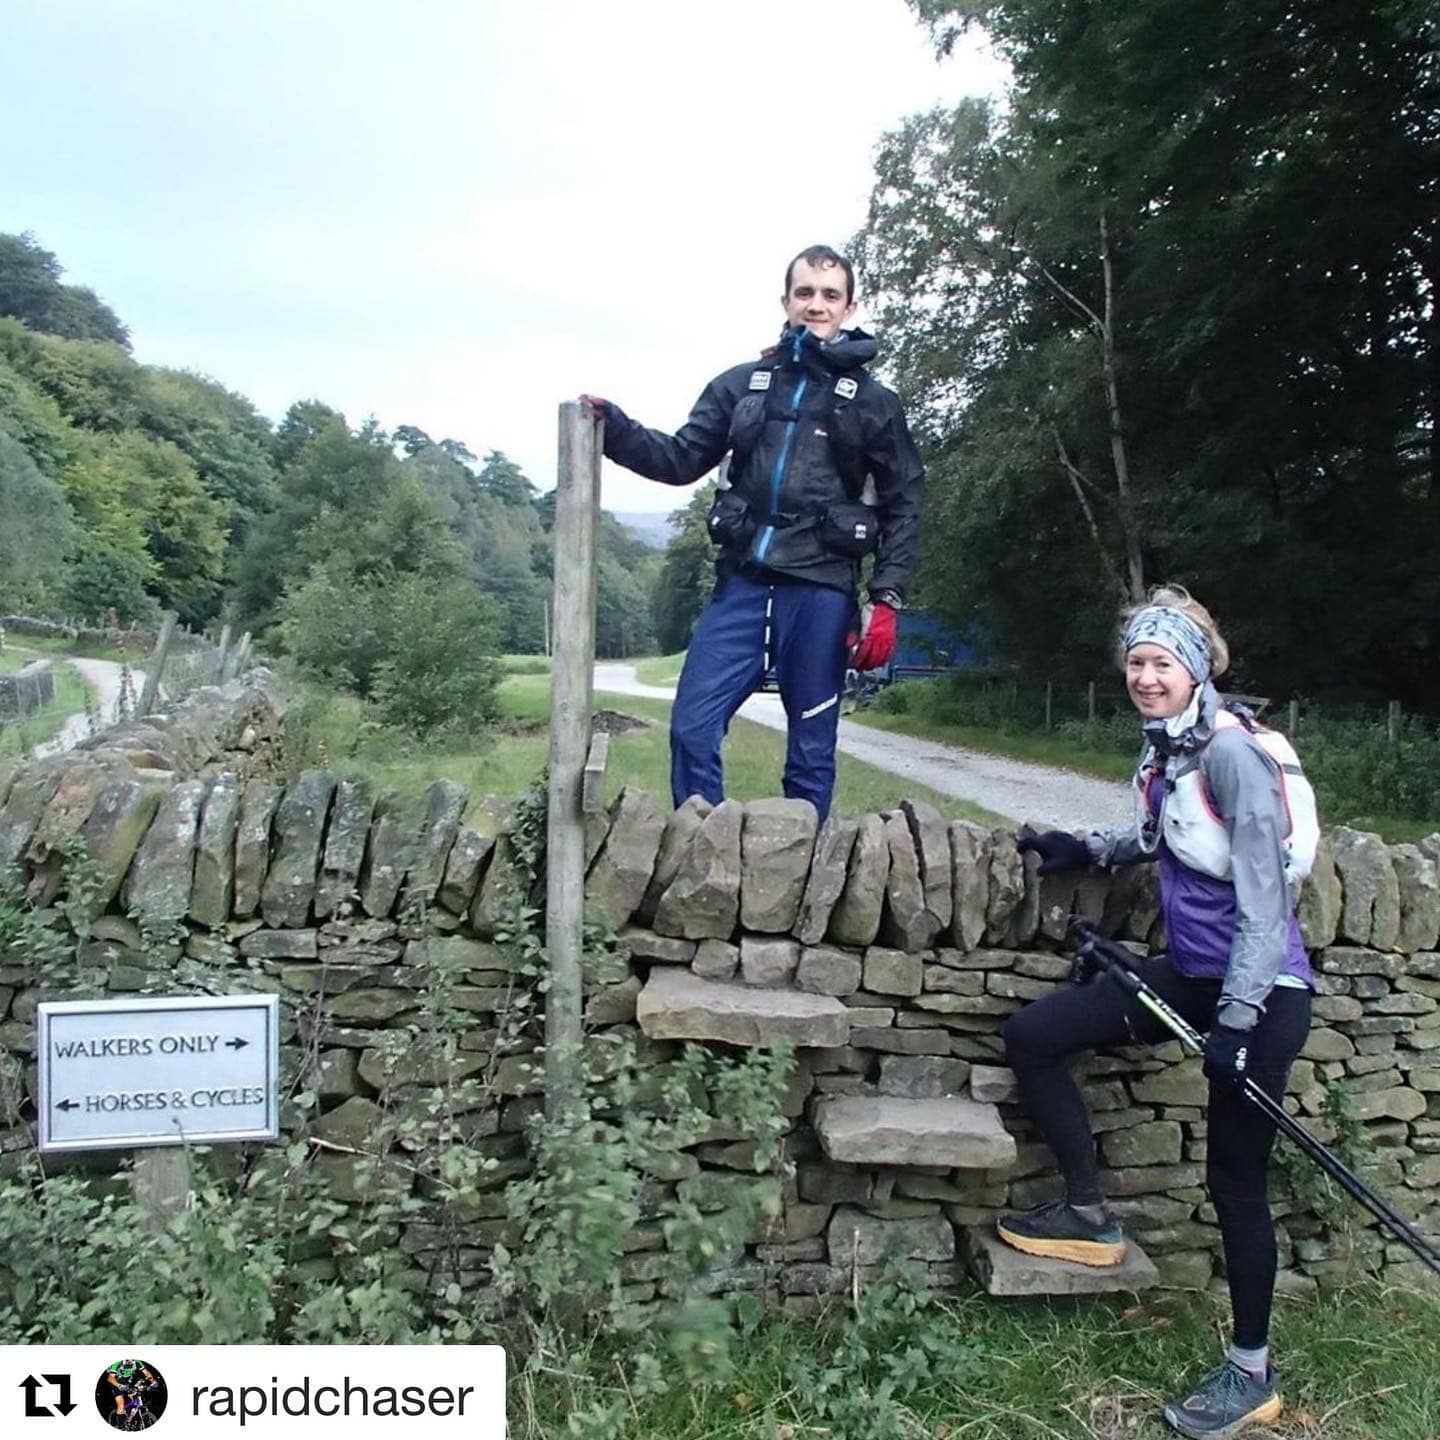 Repost from @rapidchaser with this shot from their 100km Challenge ⛰🥾⛰ #peakdistrictchallenge 

A...